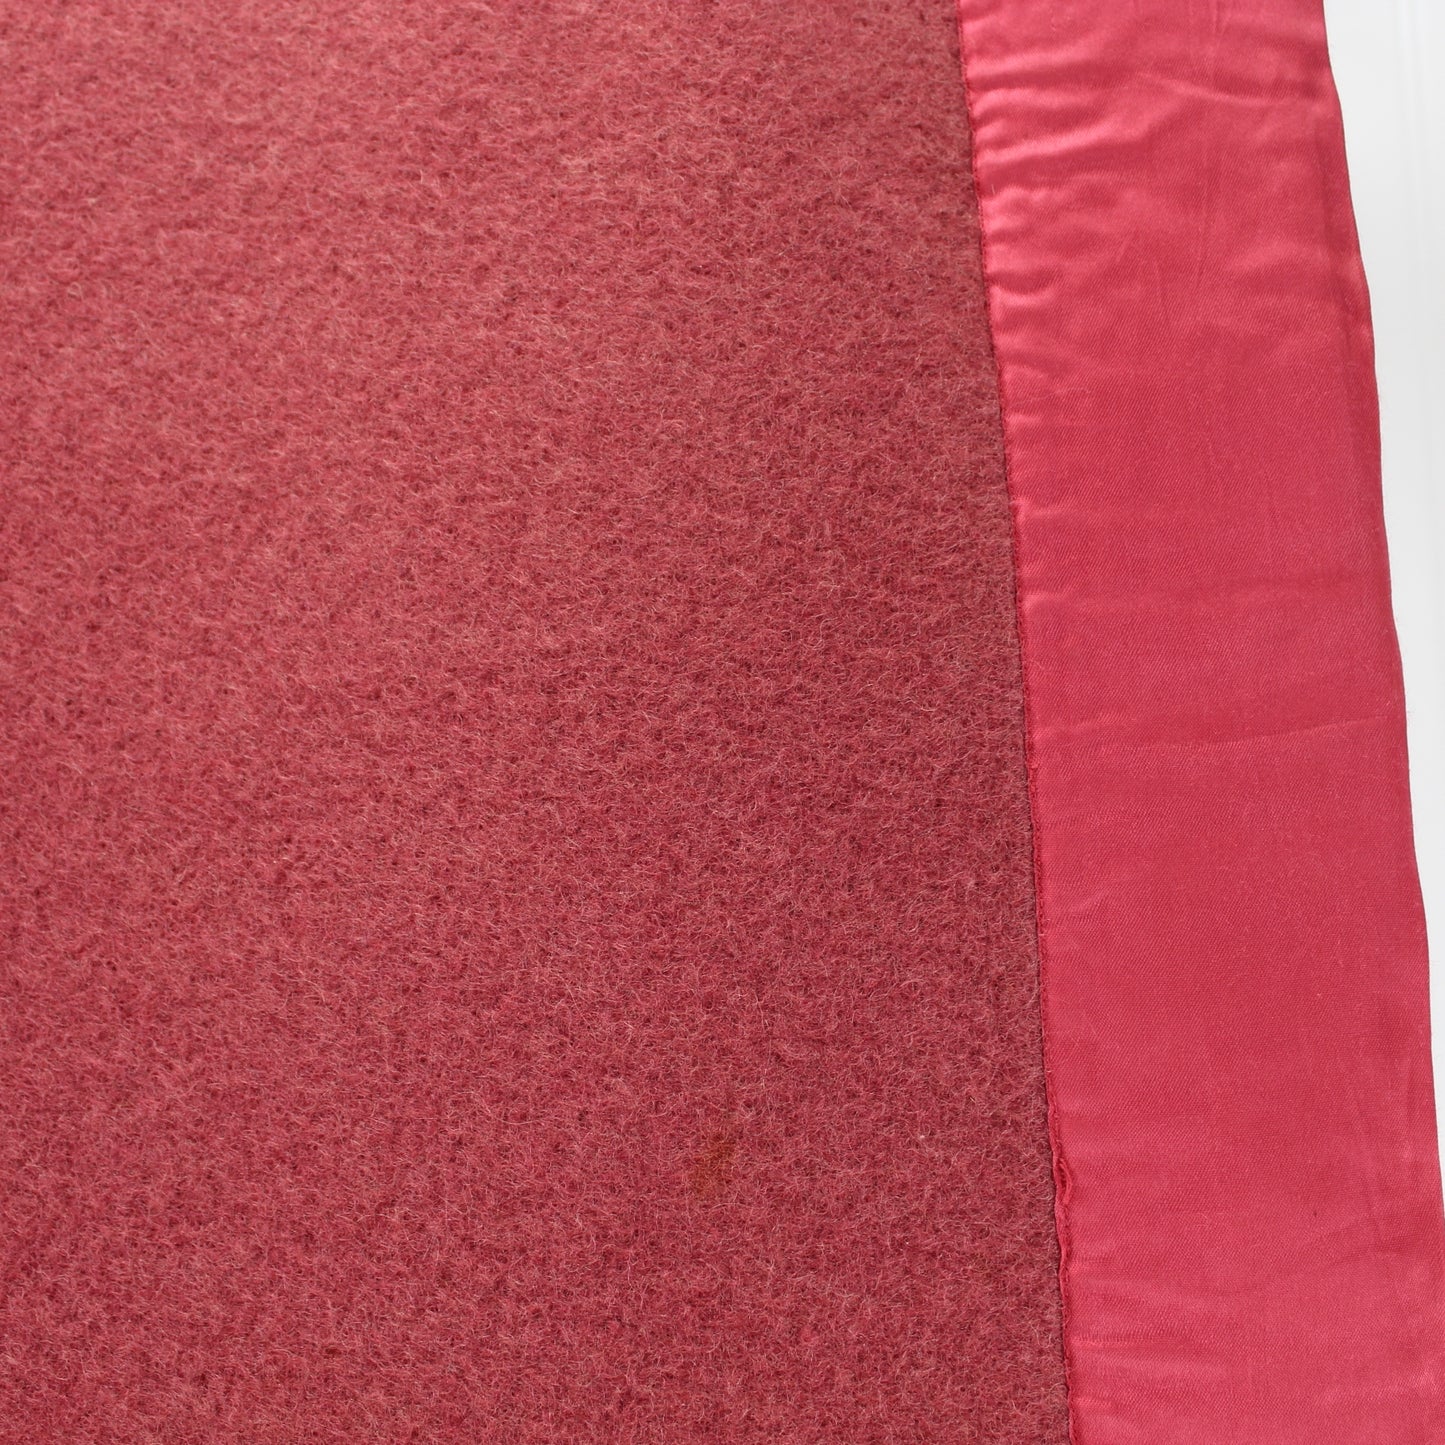 Rosie Red Wool Blanket Matching Satin Binding Special Price 72" X 88" Used